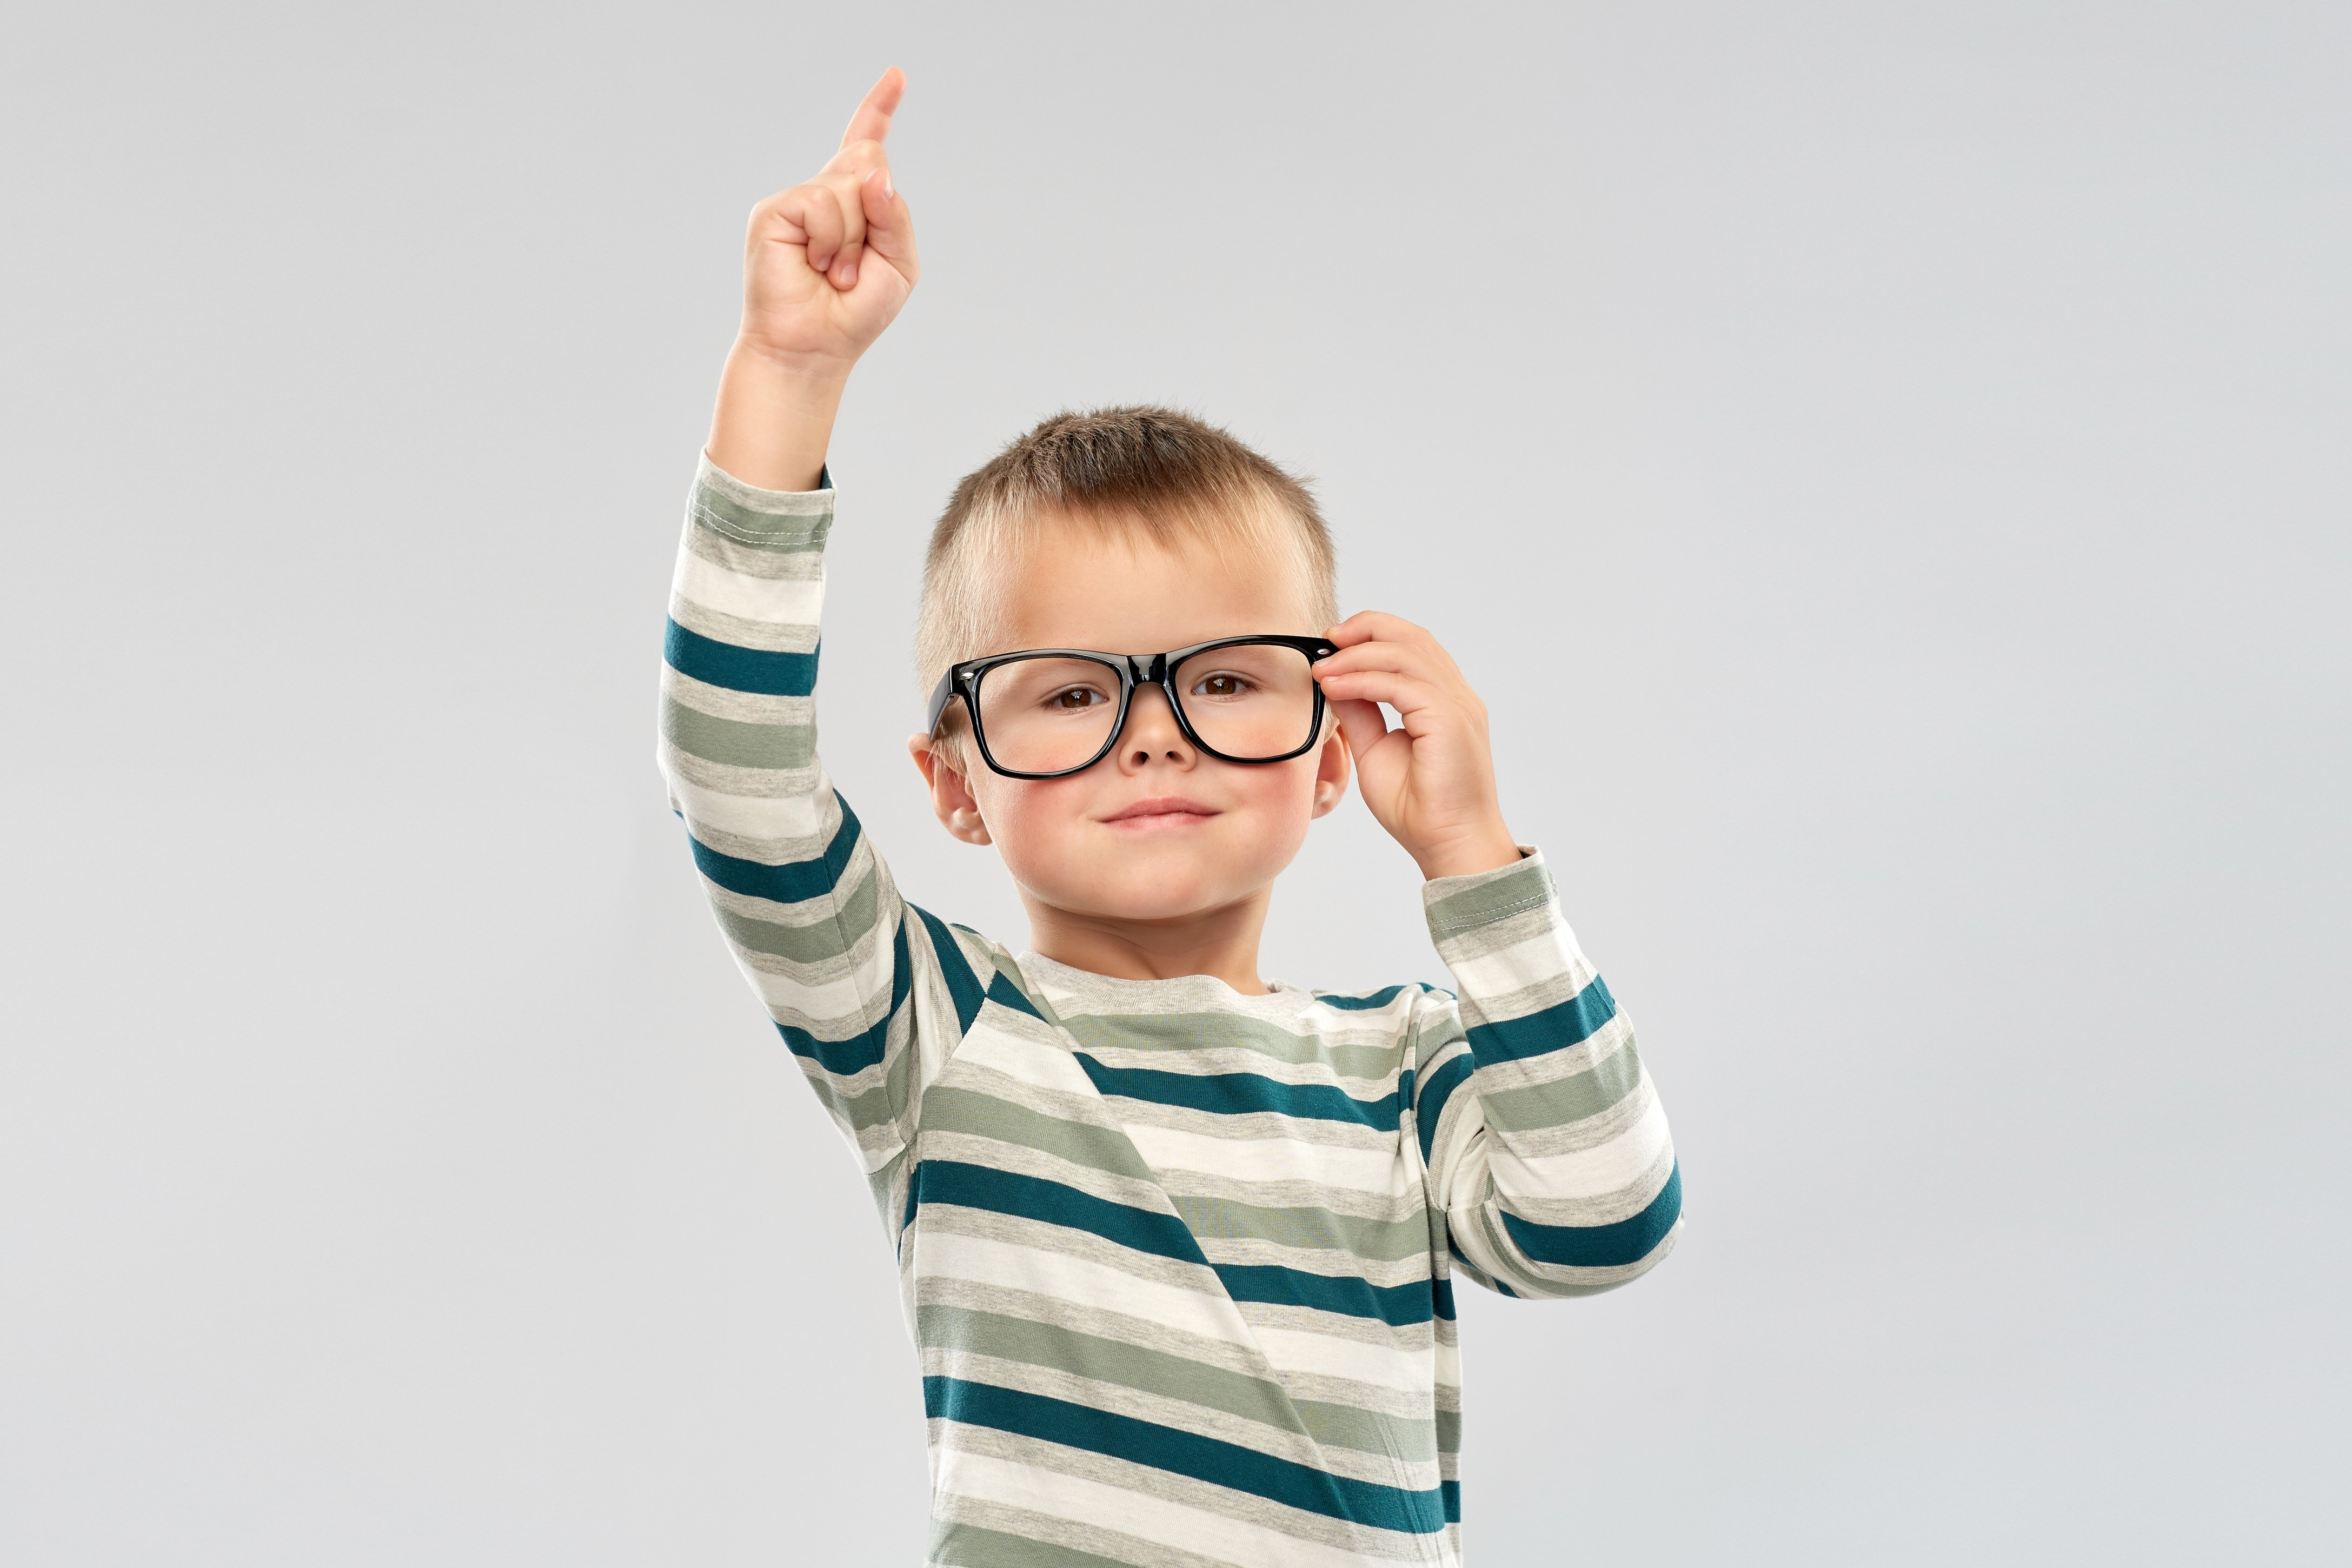 Portrait of Boy in Glasses Pointing Finger Up